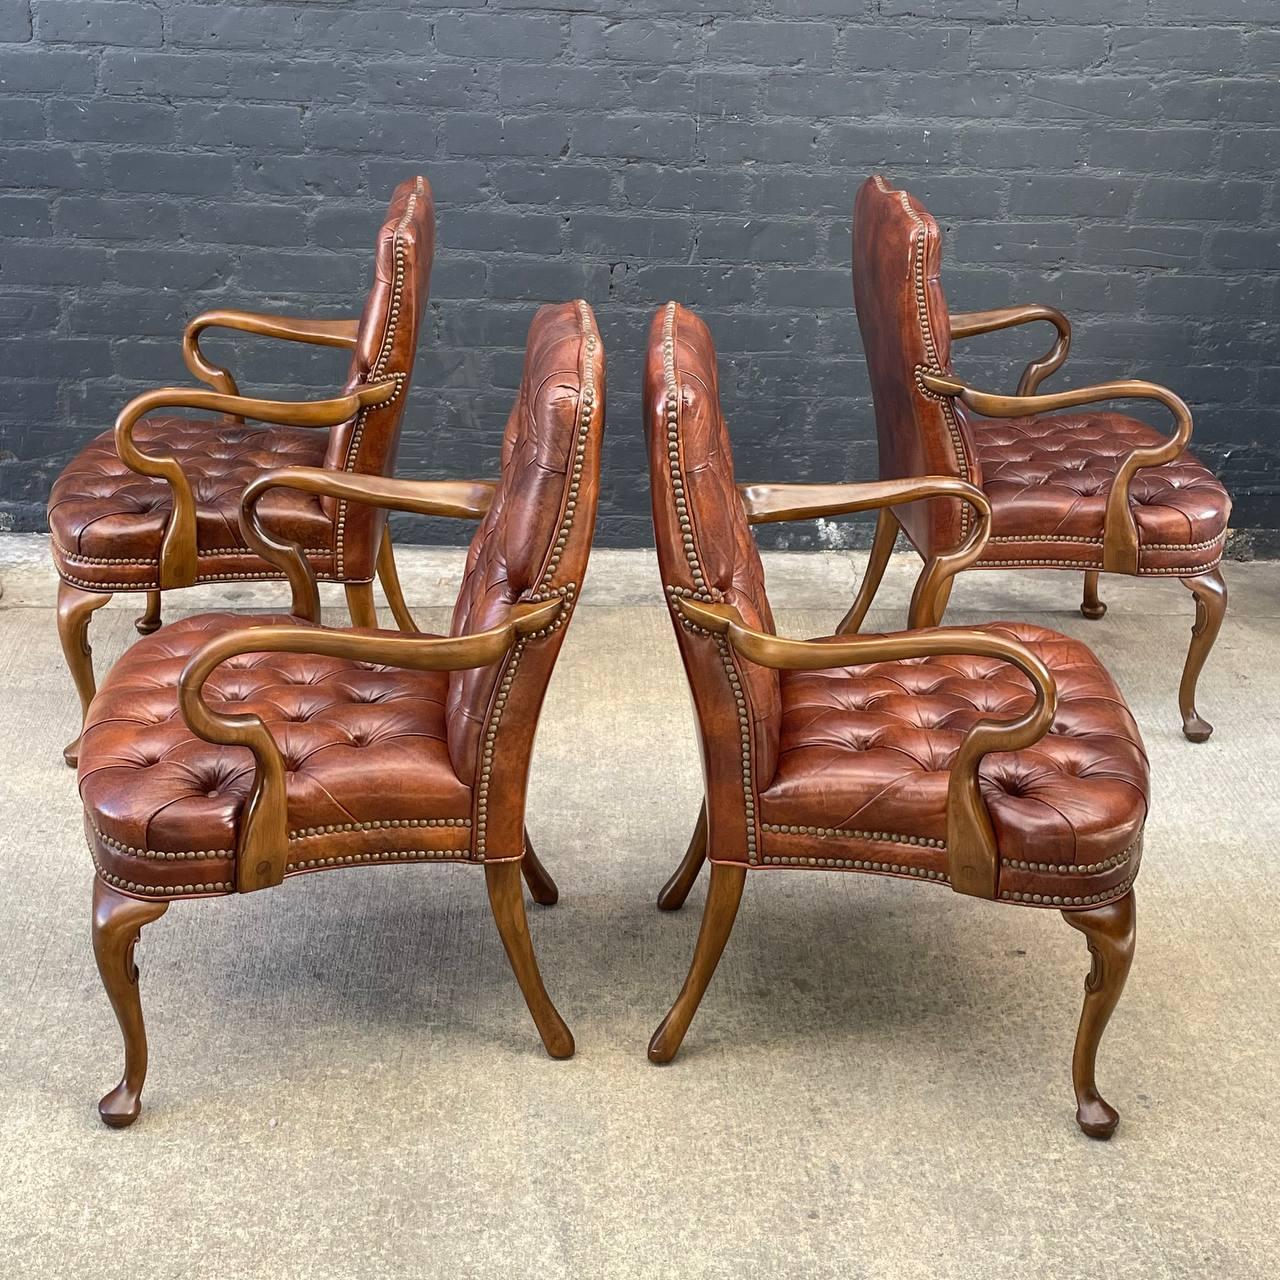 Mid-20th Century Set of 8 Mid-Century Modern Chesterfield Style Cognac Leather Arm Chairs